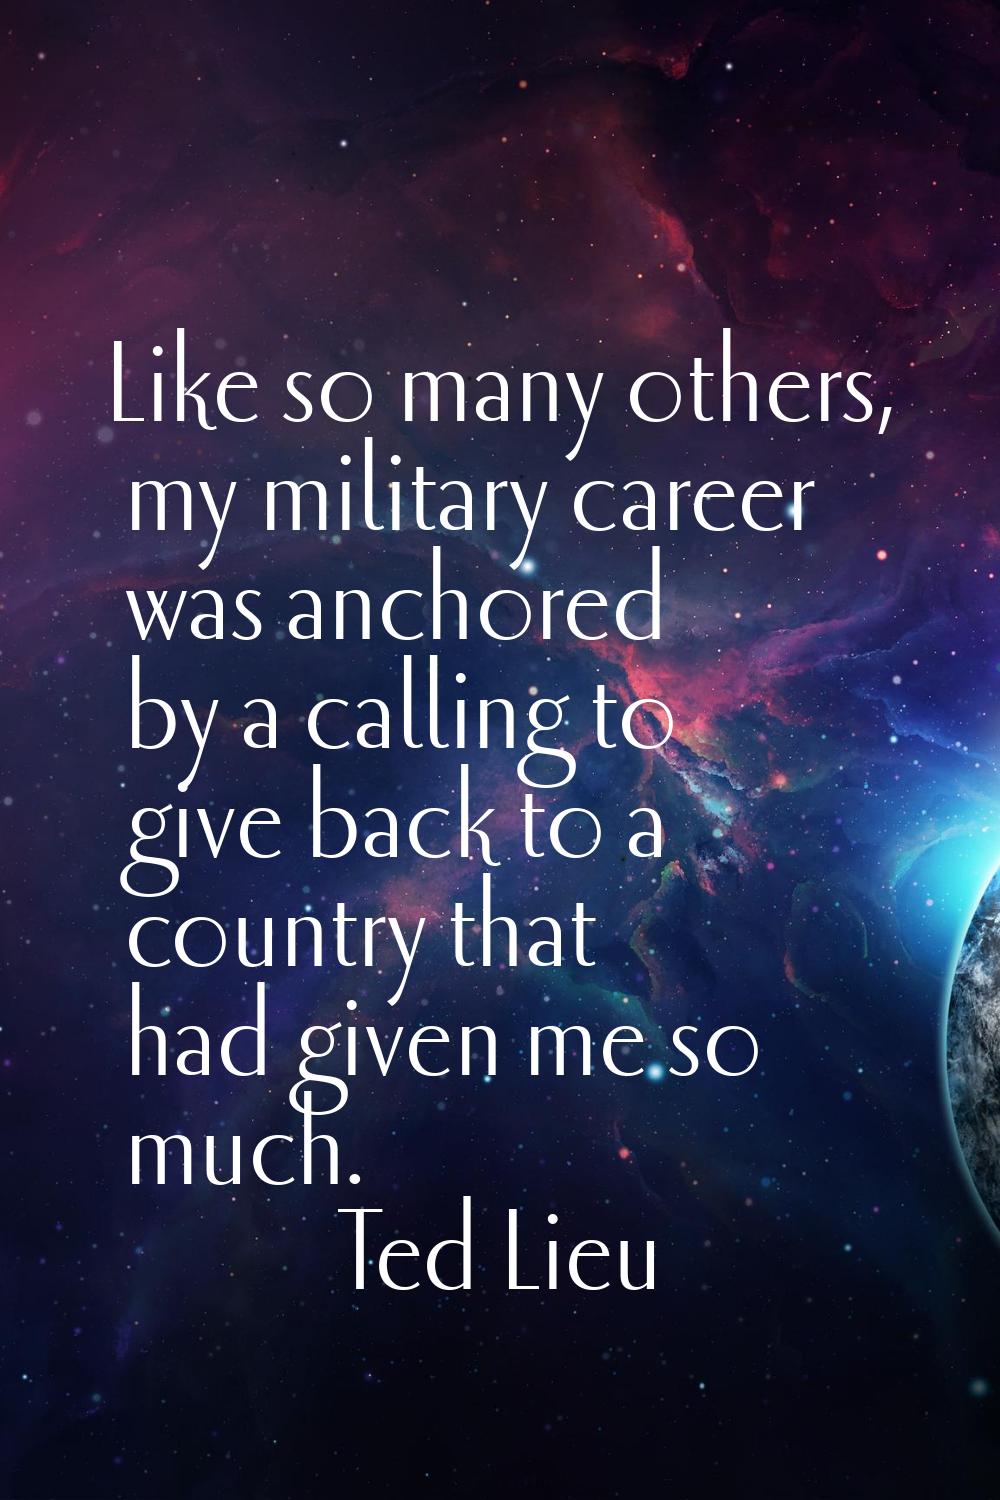 Like so many others, my military career was anchored by a calling to give back to a country that ha